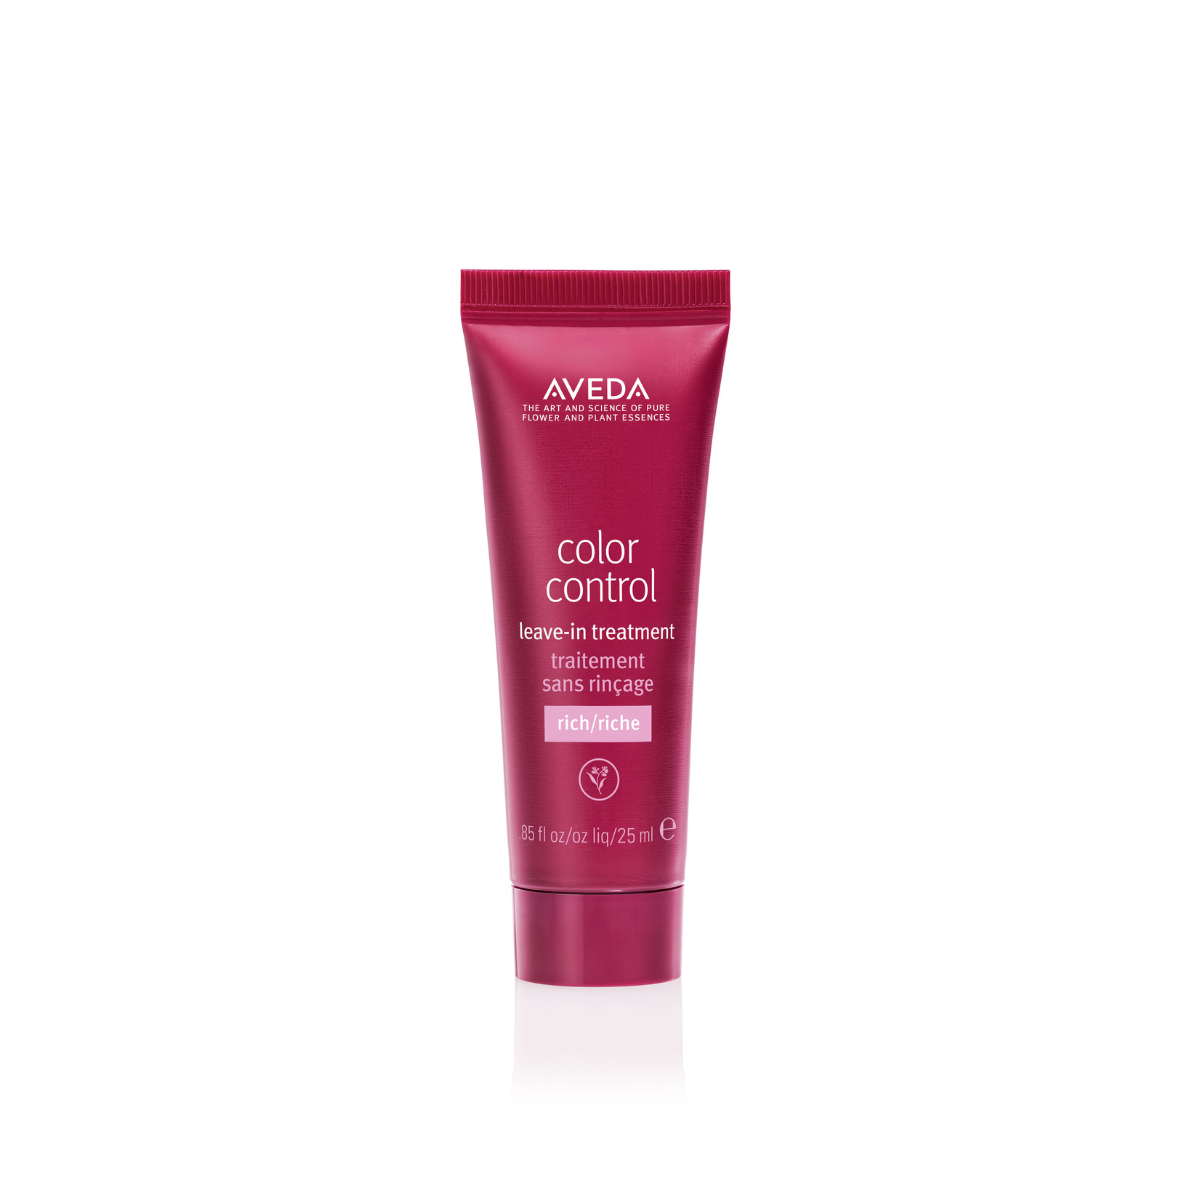 Aveda color control leave in treatment 25ml 